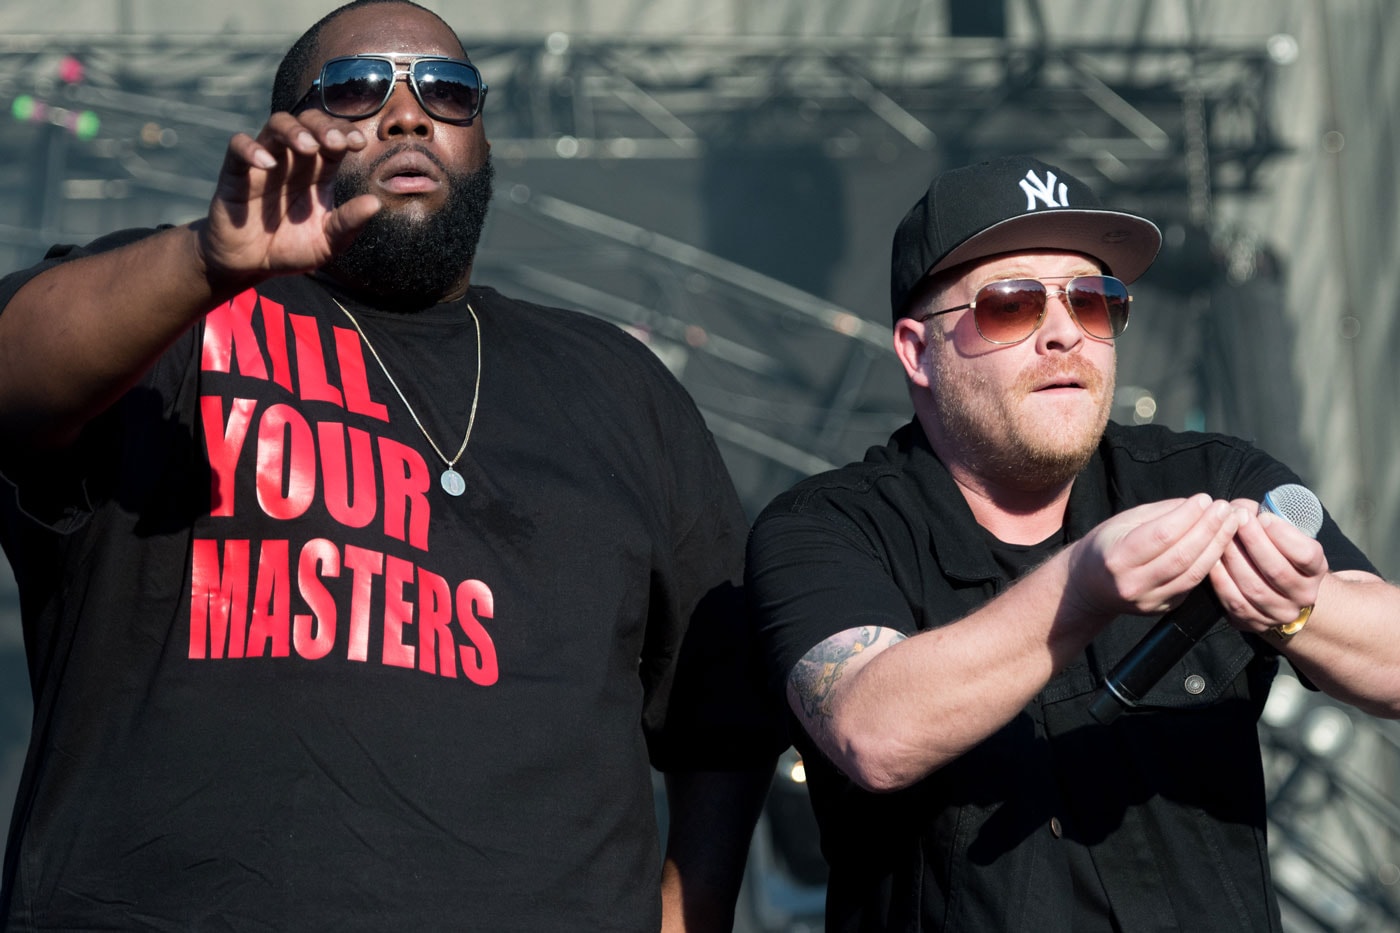 Banksy Interviews Run the Jewels About Kanye West, Theme Parks and More